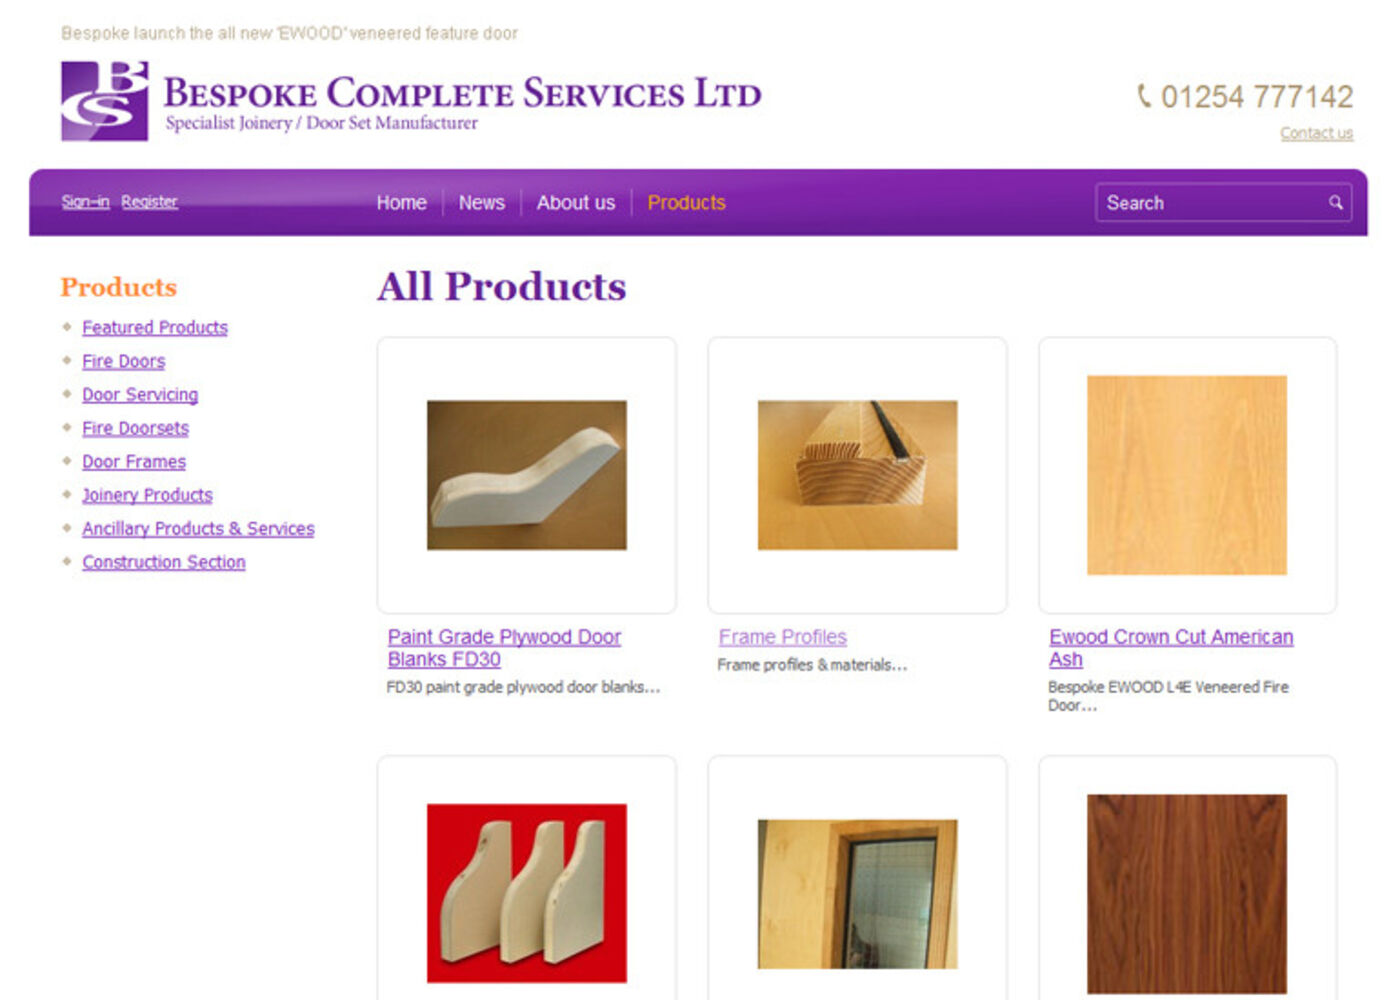 Bespoke Complete Services Ltd Products